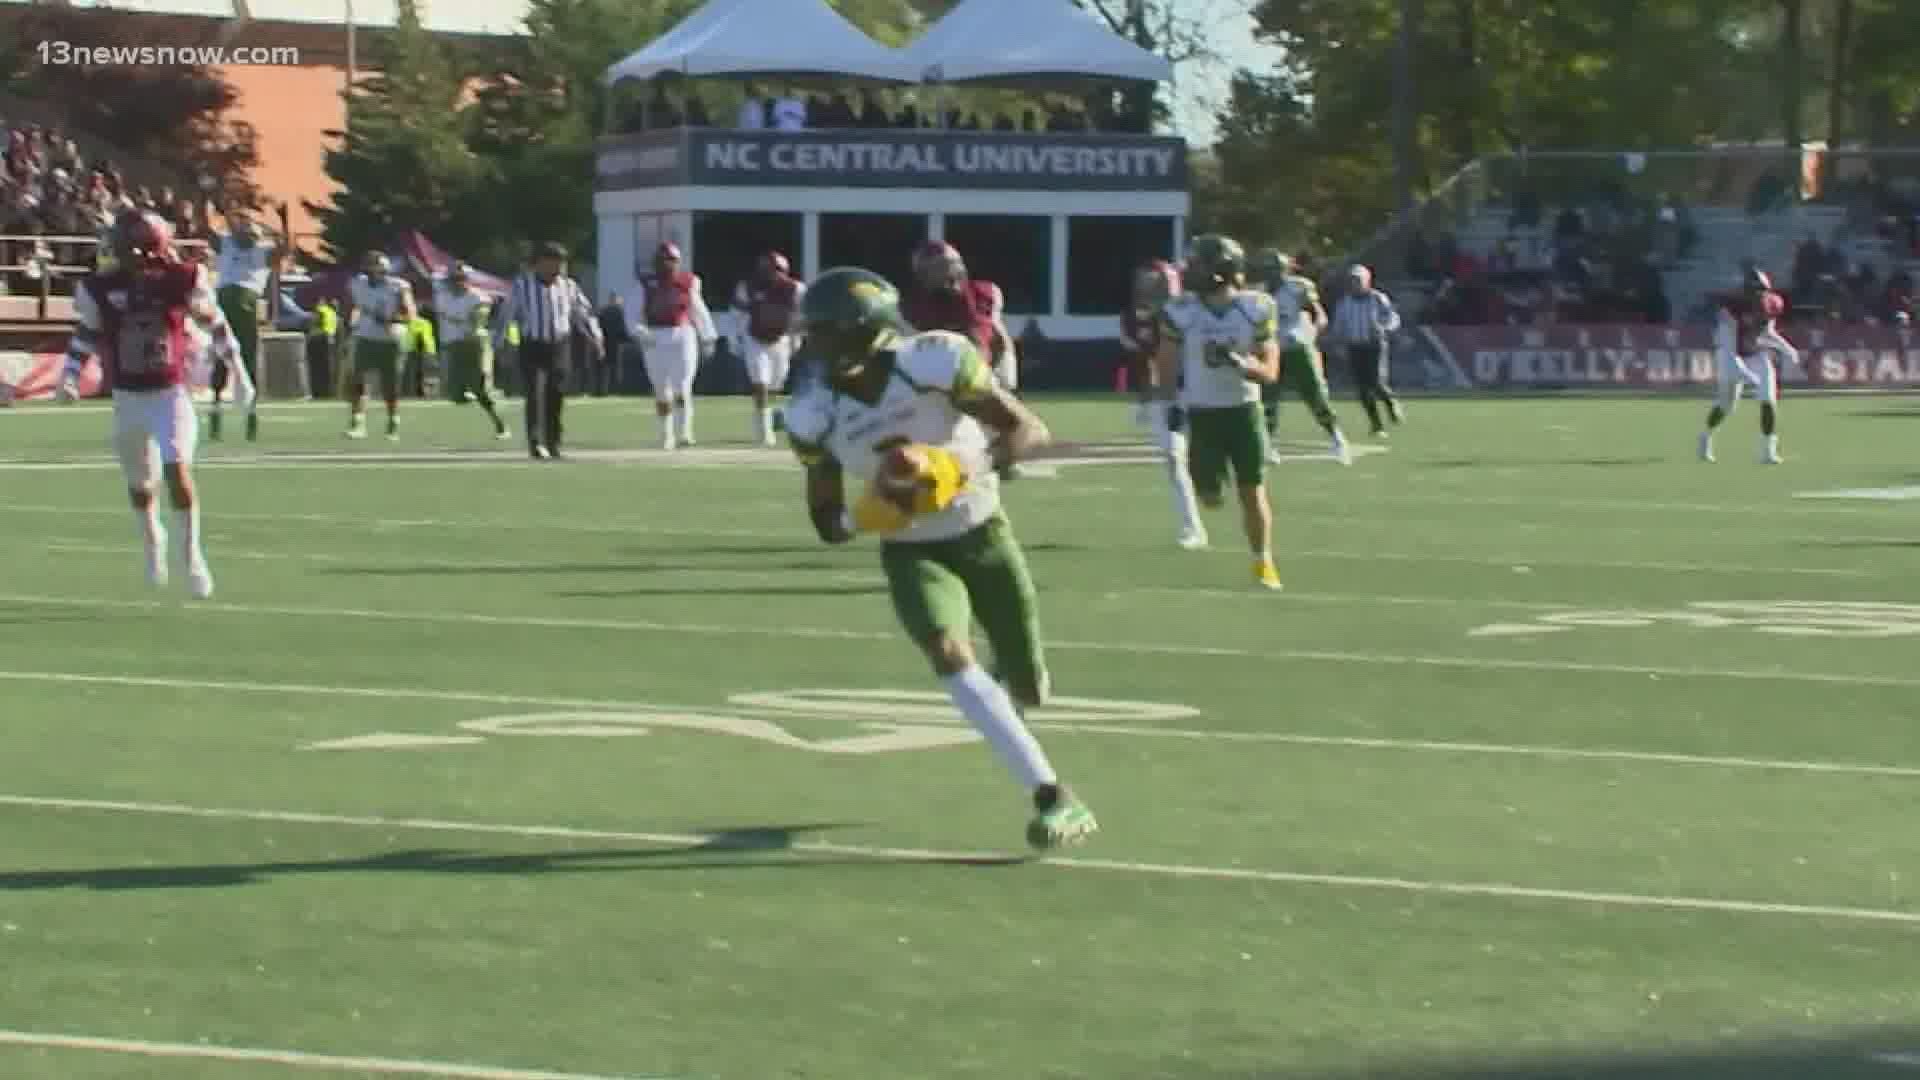 Norfolk State University opted out of the 2021 spring football competition schedule due to COVID-19 concerns.